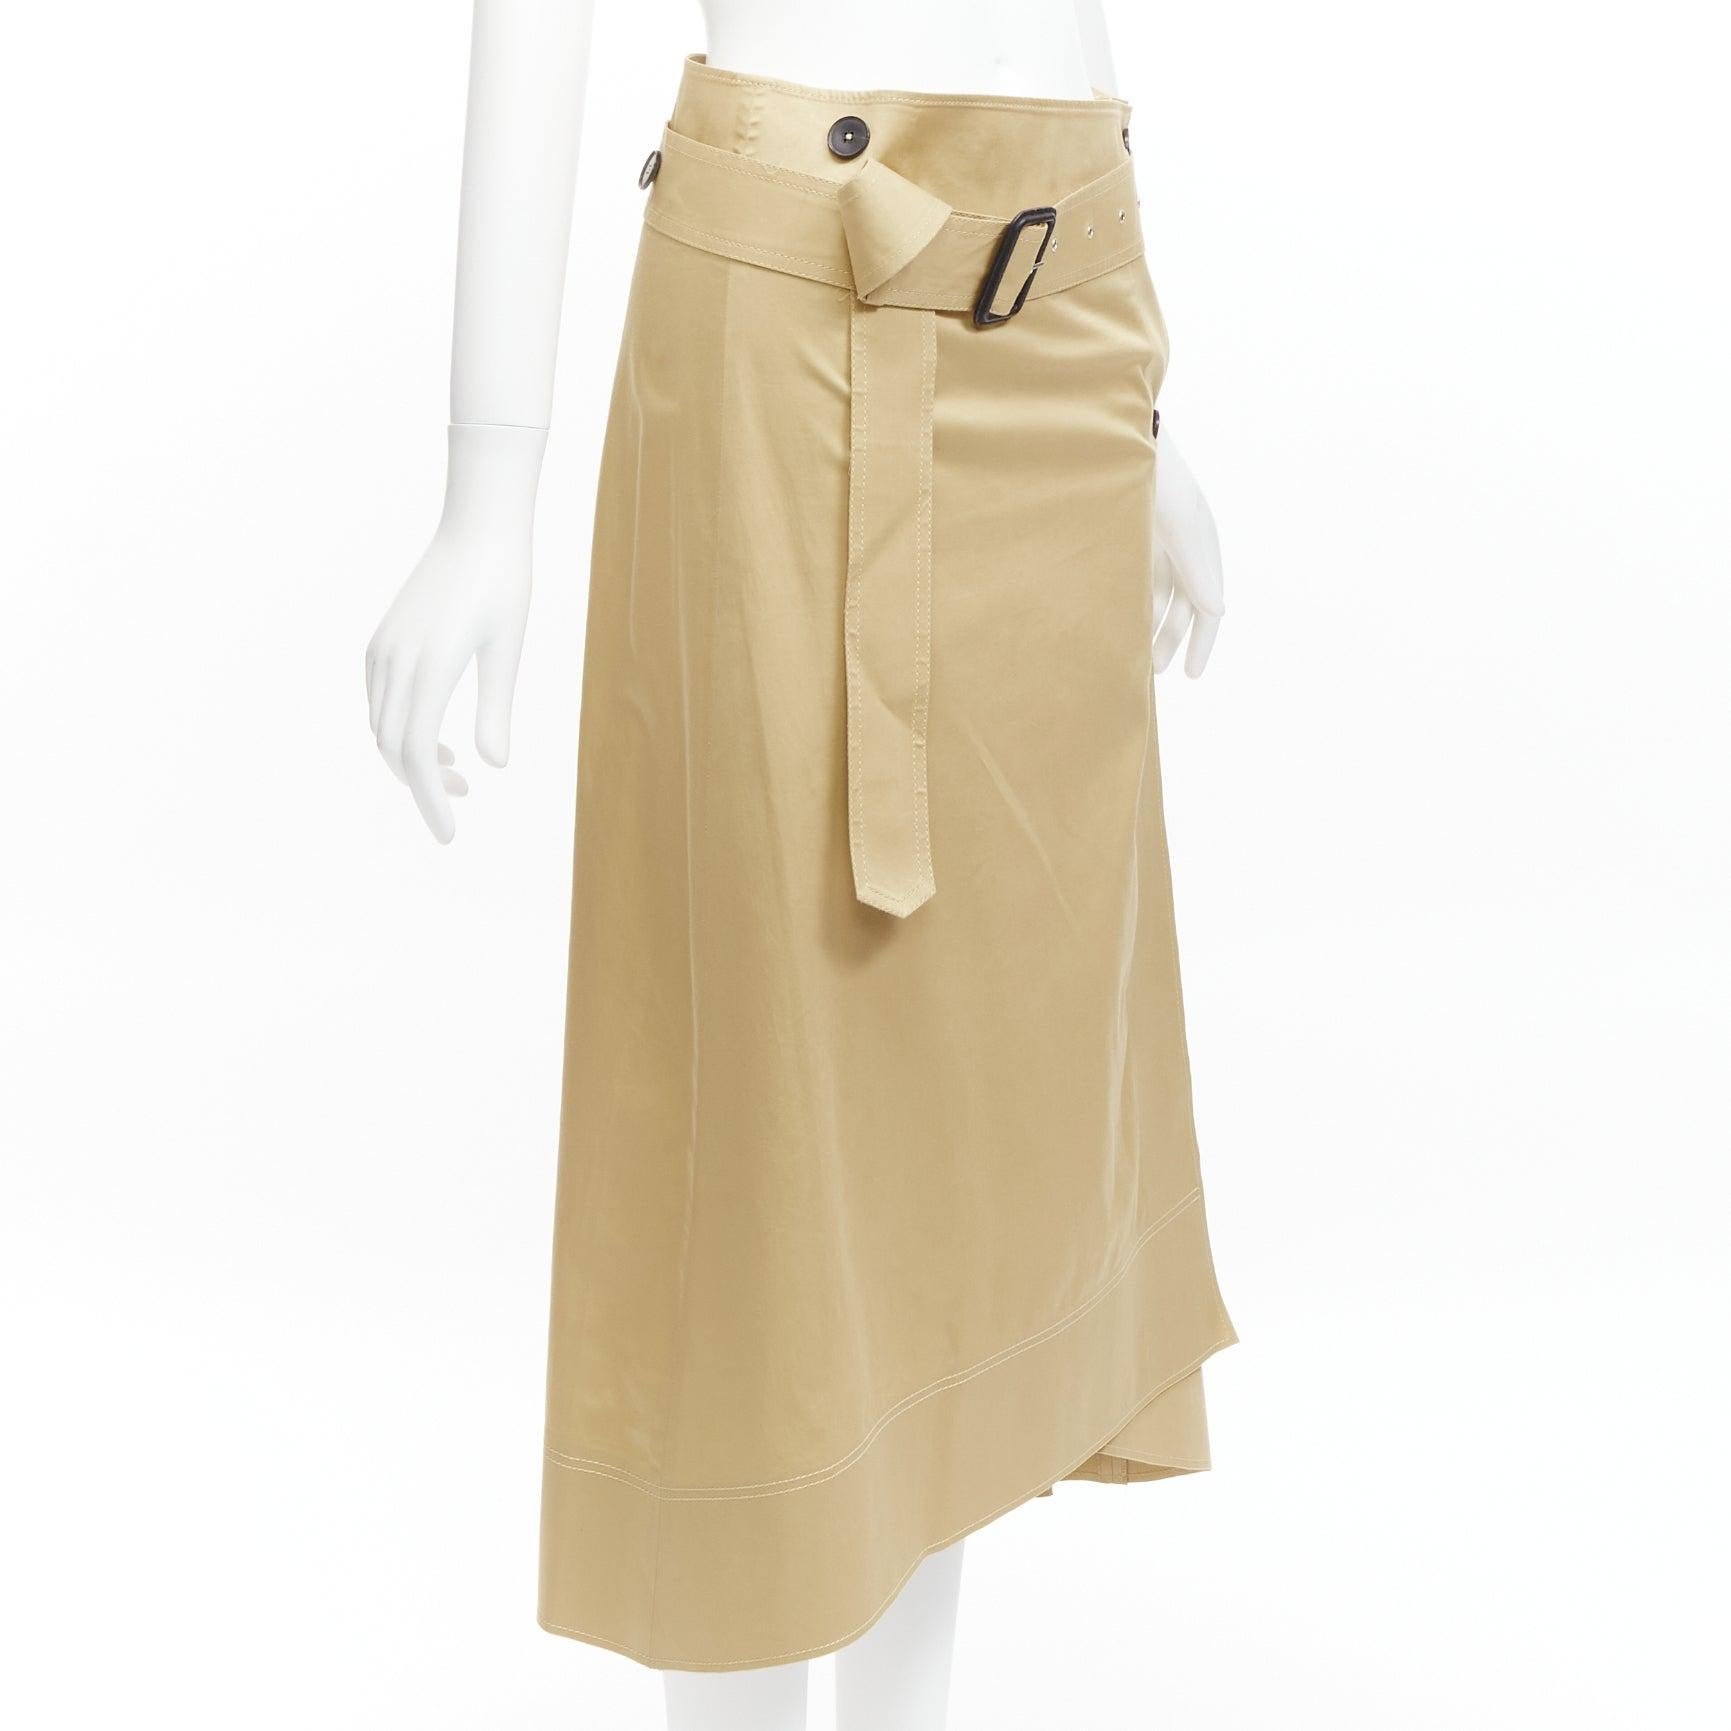 Beige JOSEPH khaki cotton military safari belted trench inspired A-line wrap skirt For Sale